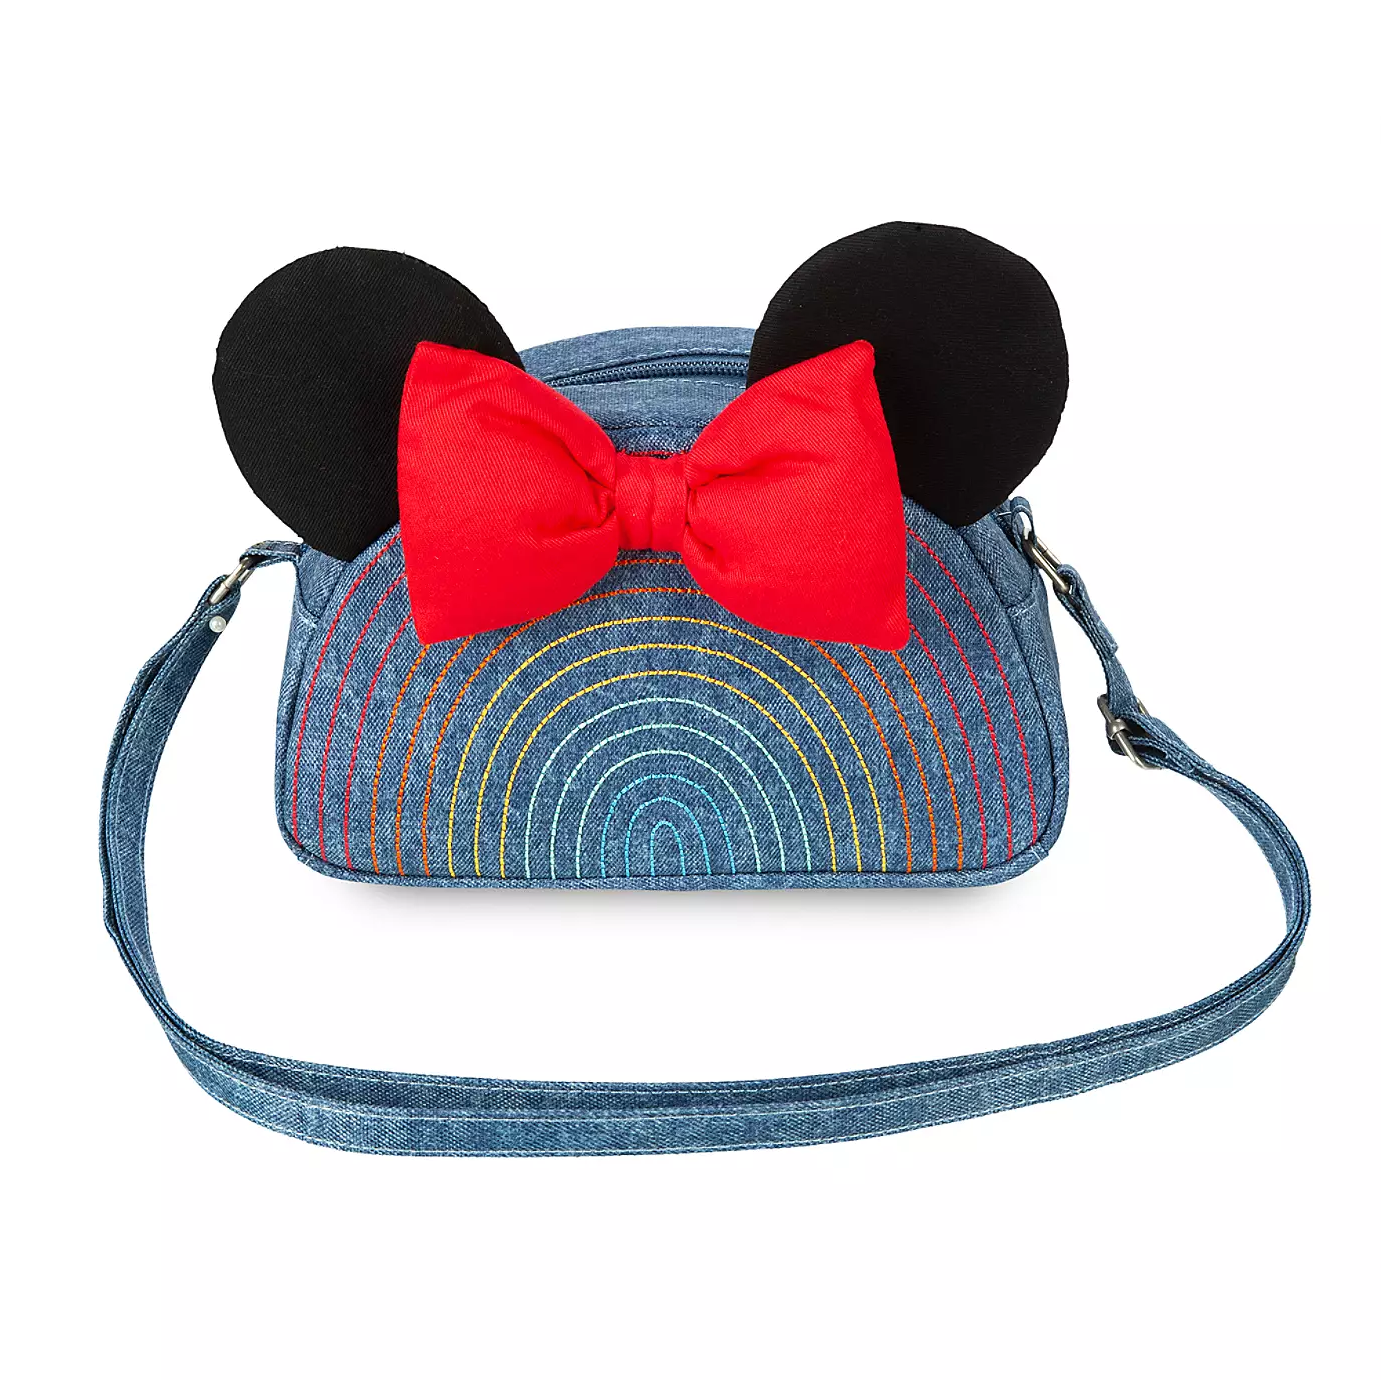 Minnie Mouse Red Crossbody Bag